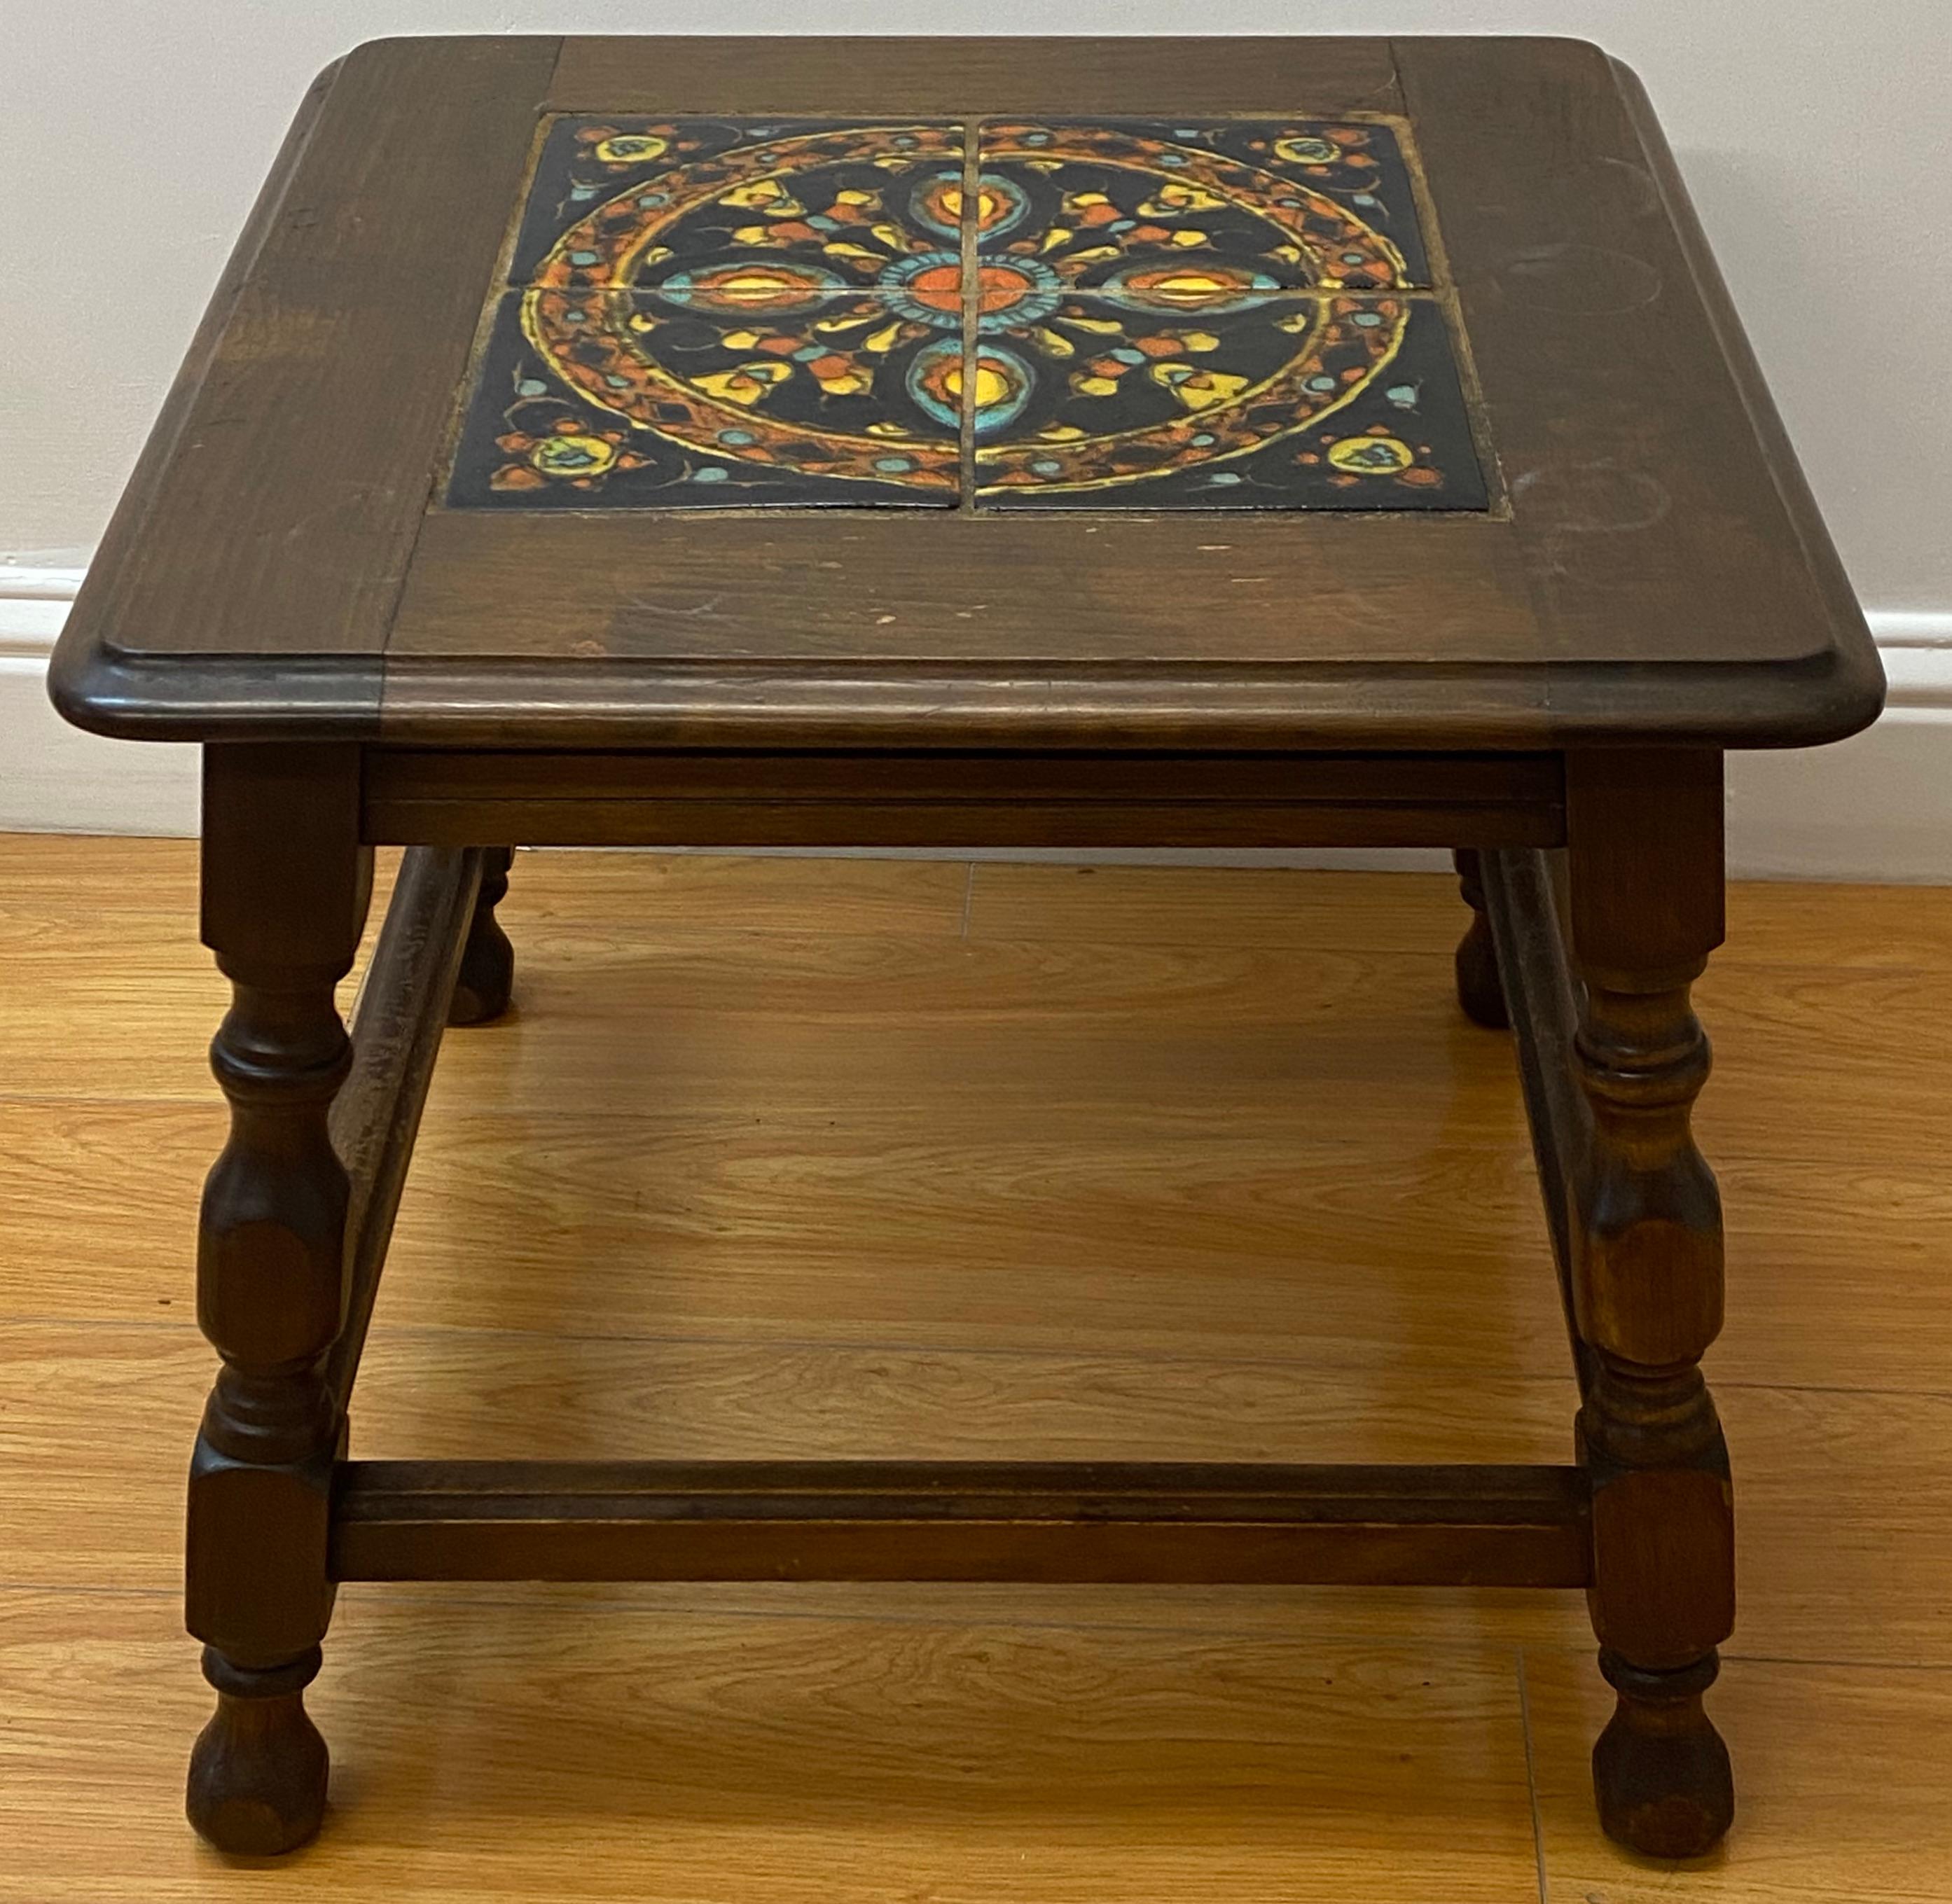 Mission oak Arts & Crafts tile top side table, circa 1920

handcrafted Mission oak with hand painted glazed tile inlaid top

Dimensions: 20